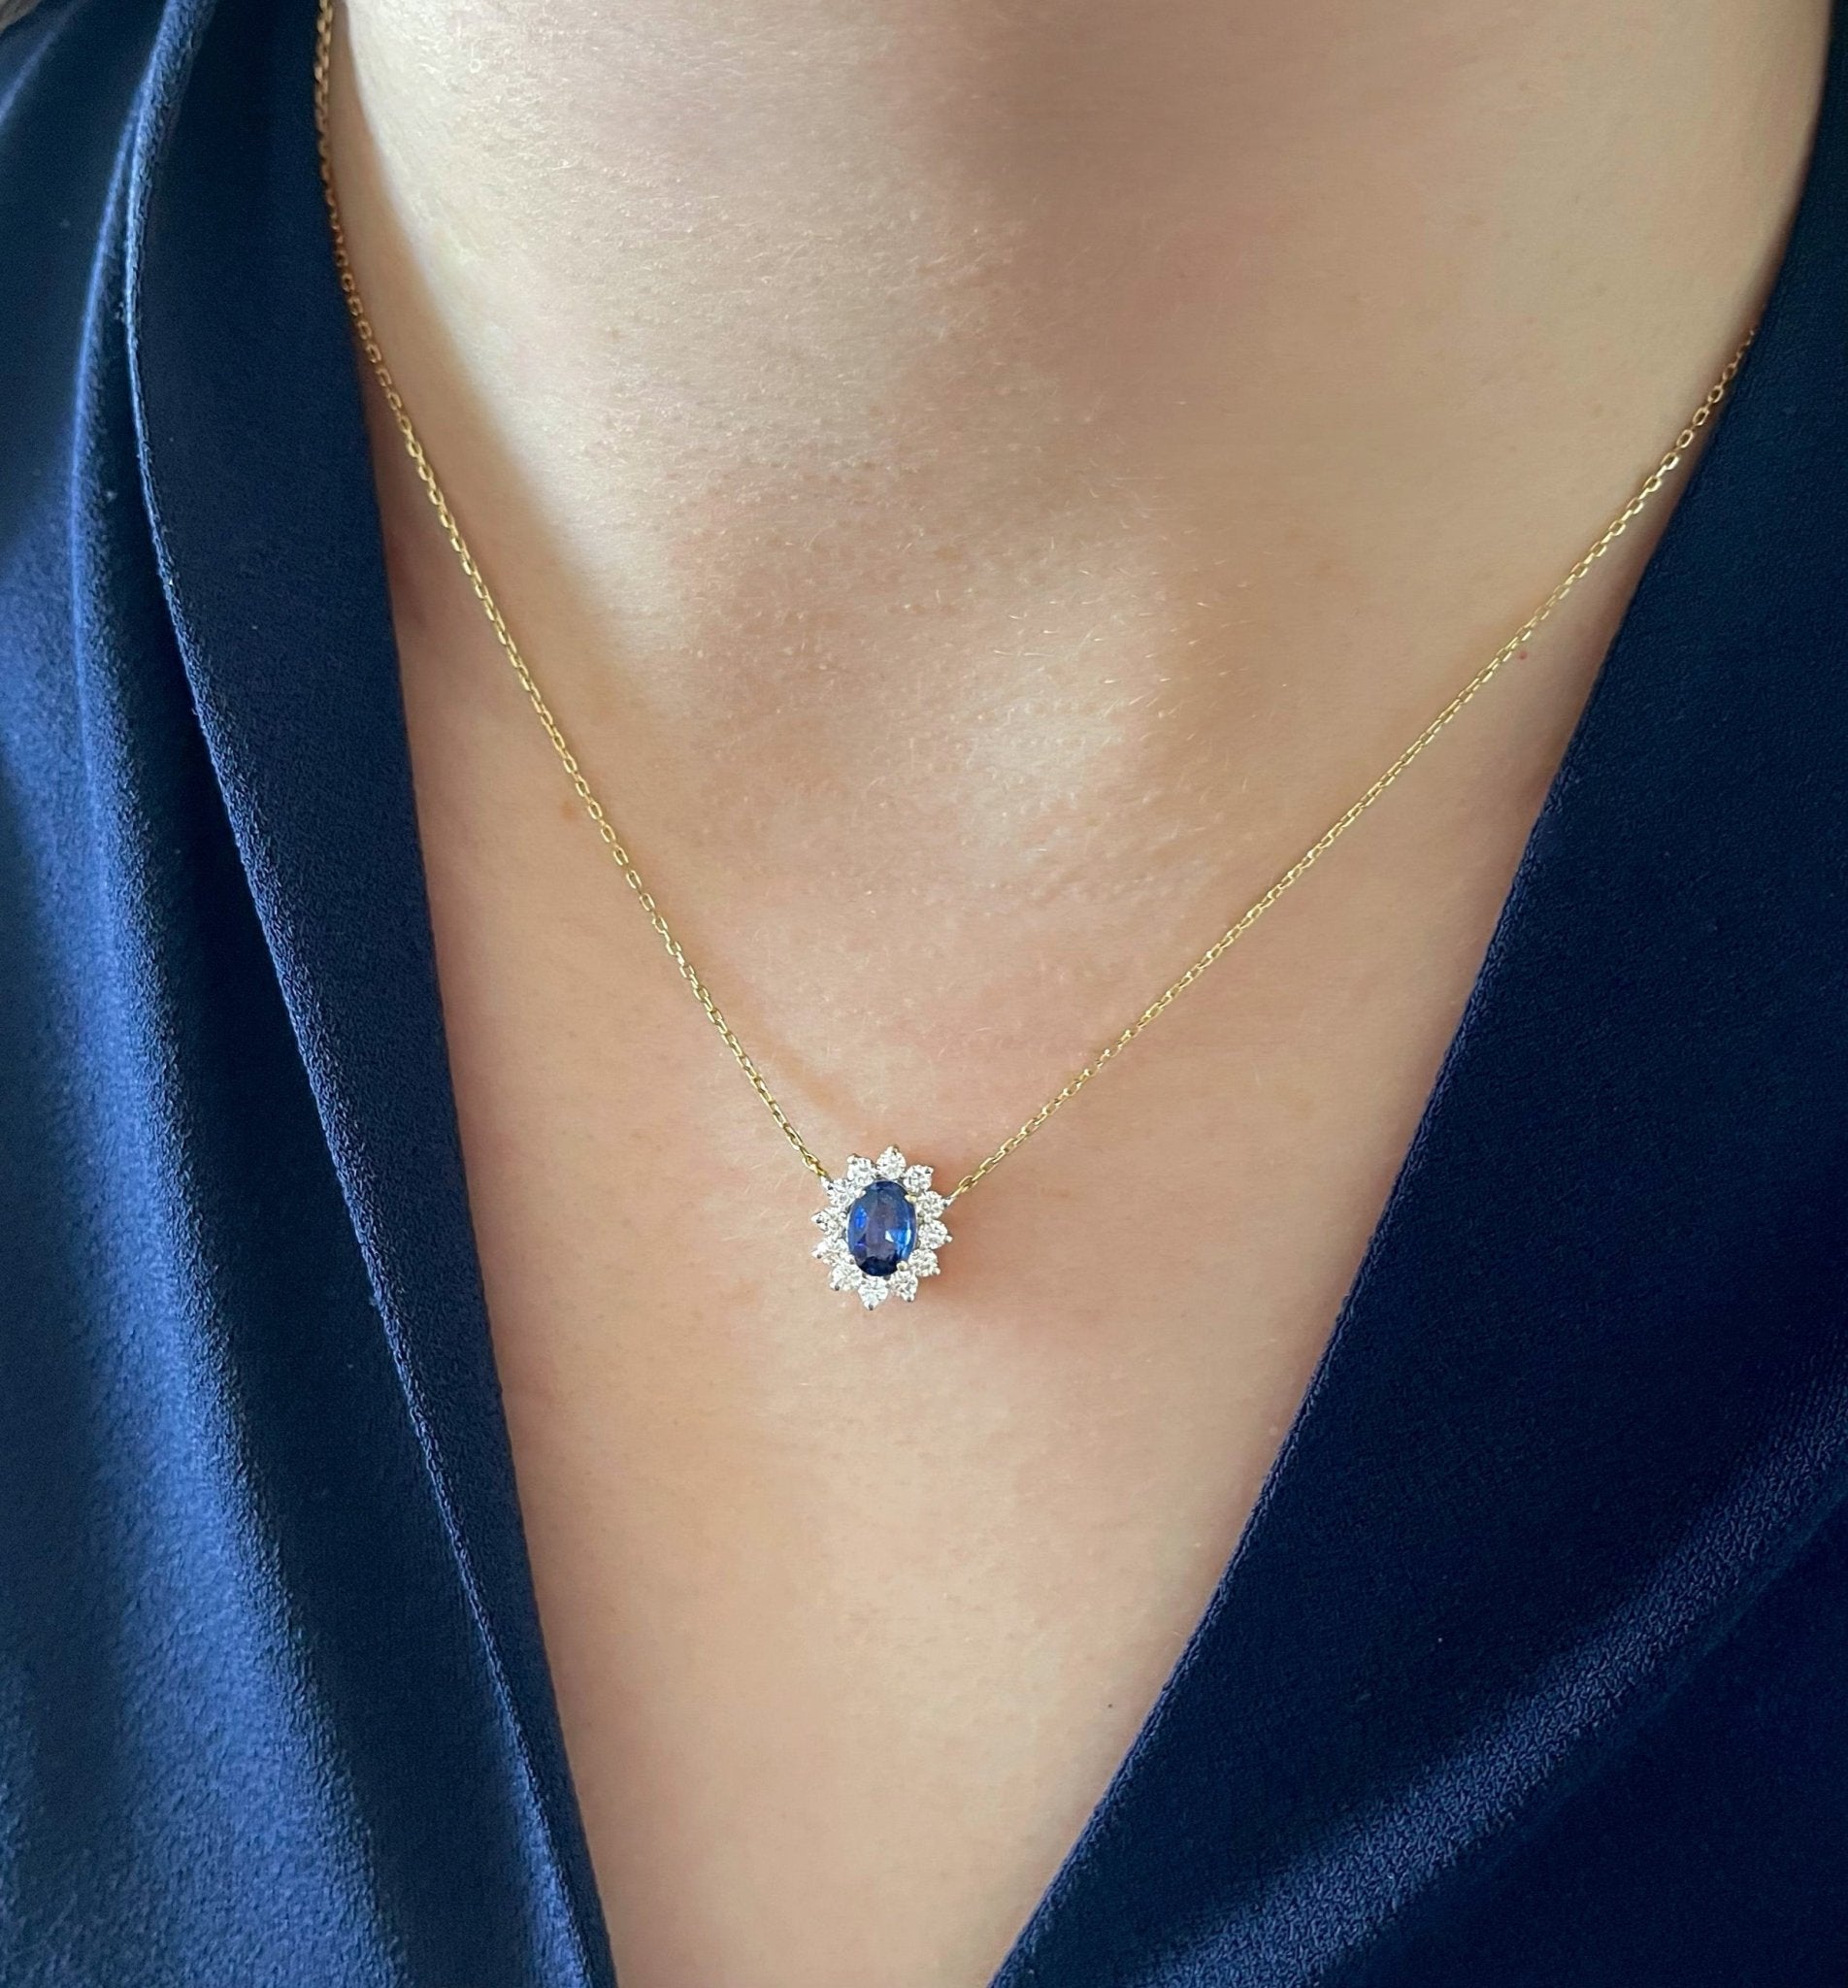 Diana Necklace in Diamond and Sapphire - 18k Gold - Lynor